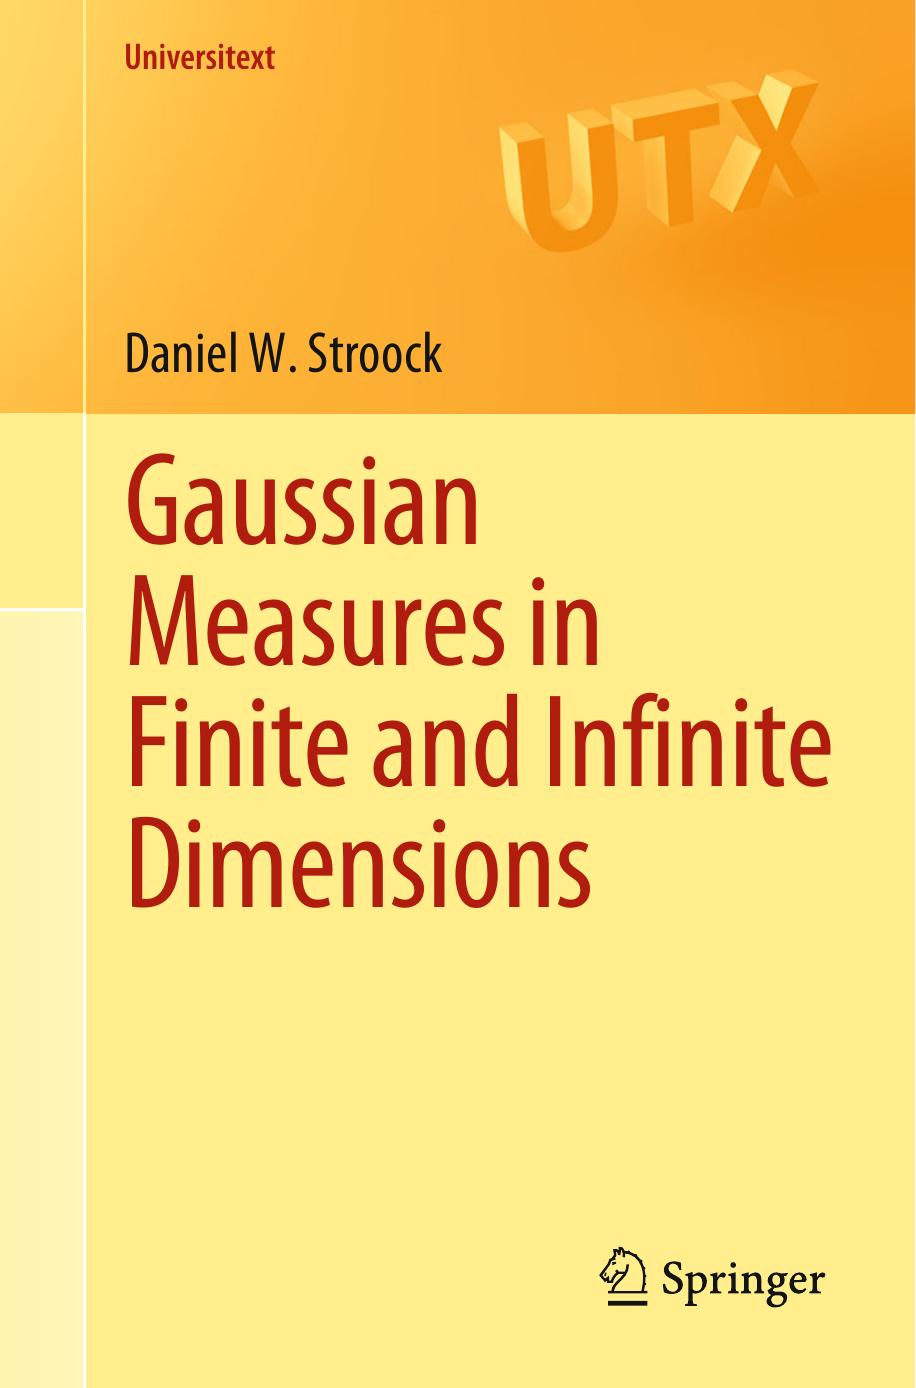 Gaussian Measures in Finite and Infinite Dimensions by Daniel W. Stroock